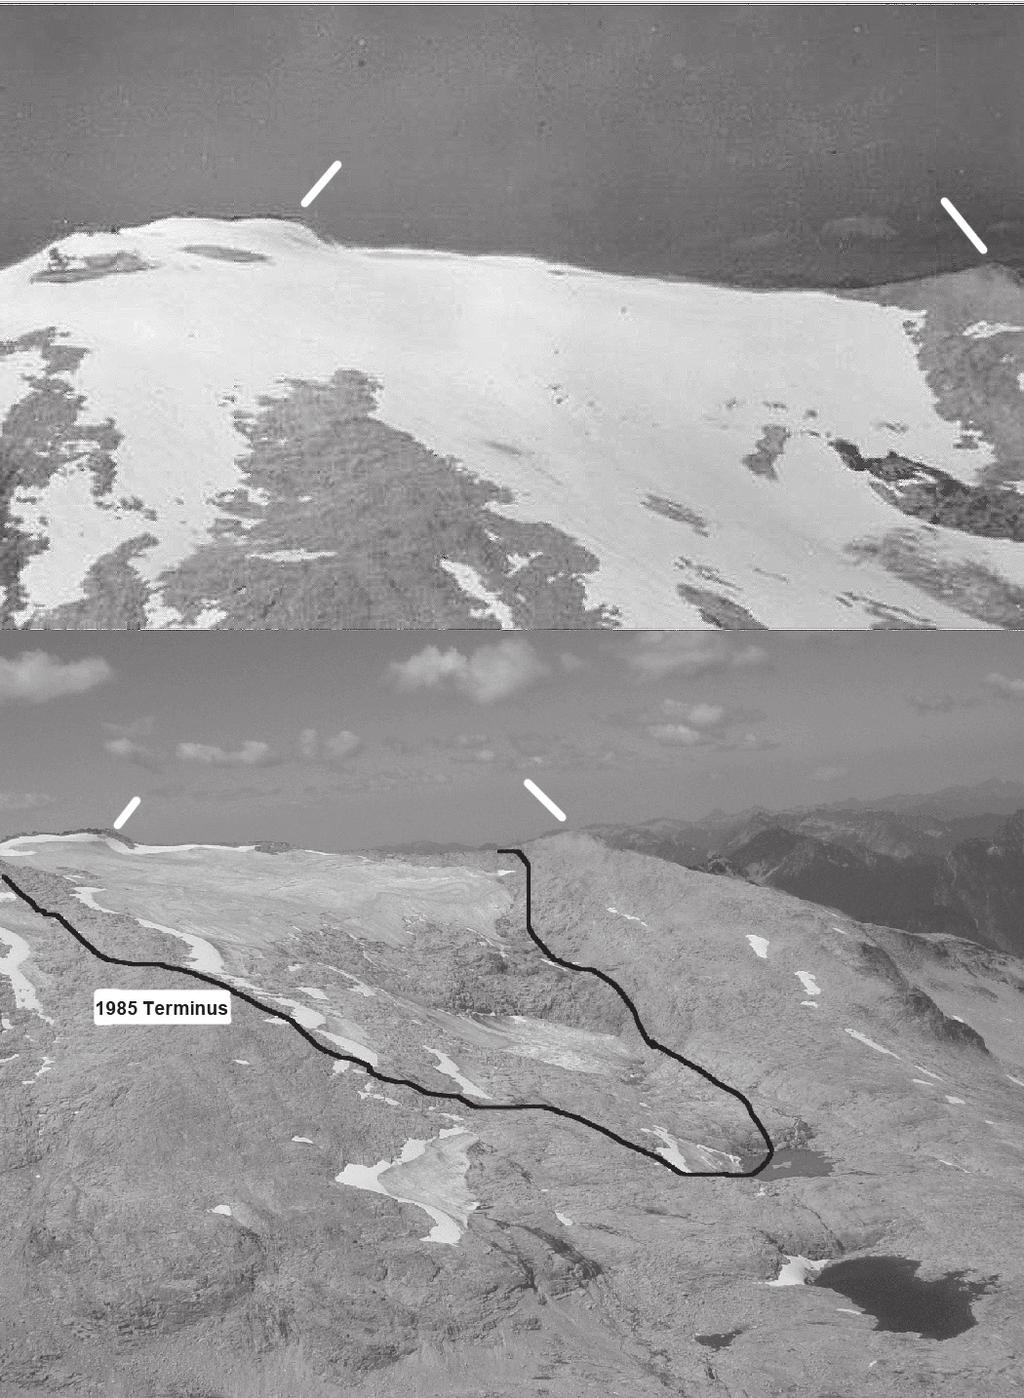 summer melt season. If the upper reaches of the glacier, where the accumulation zone is located, the glacier is thinning significantly, then it is no longer consistently an accumulation zone.